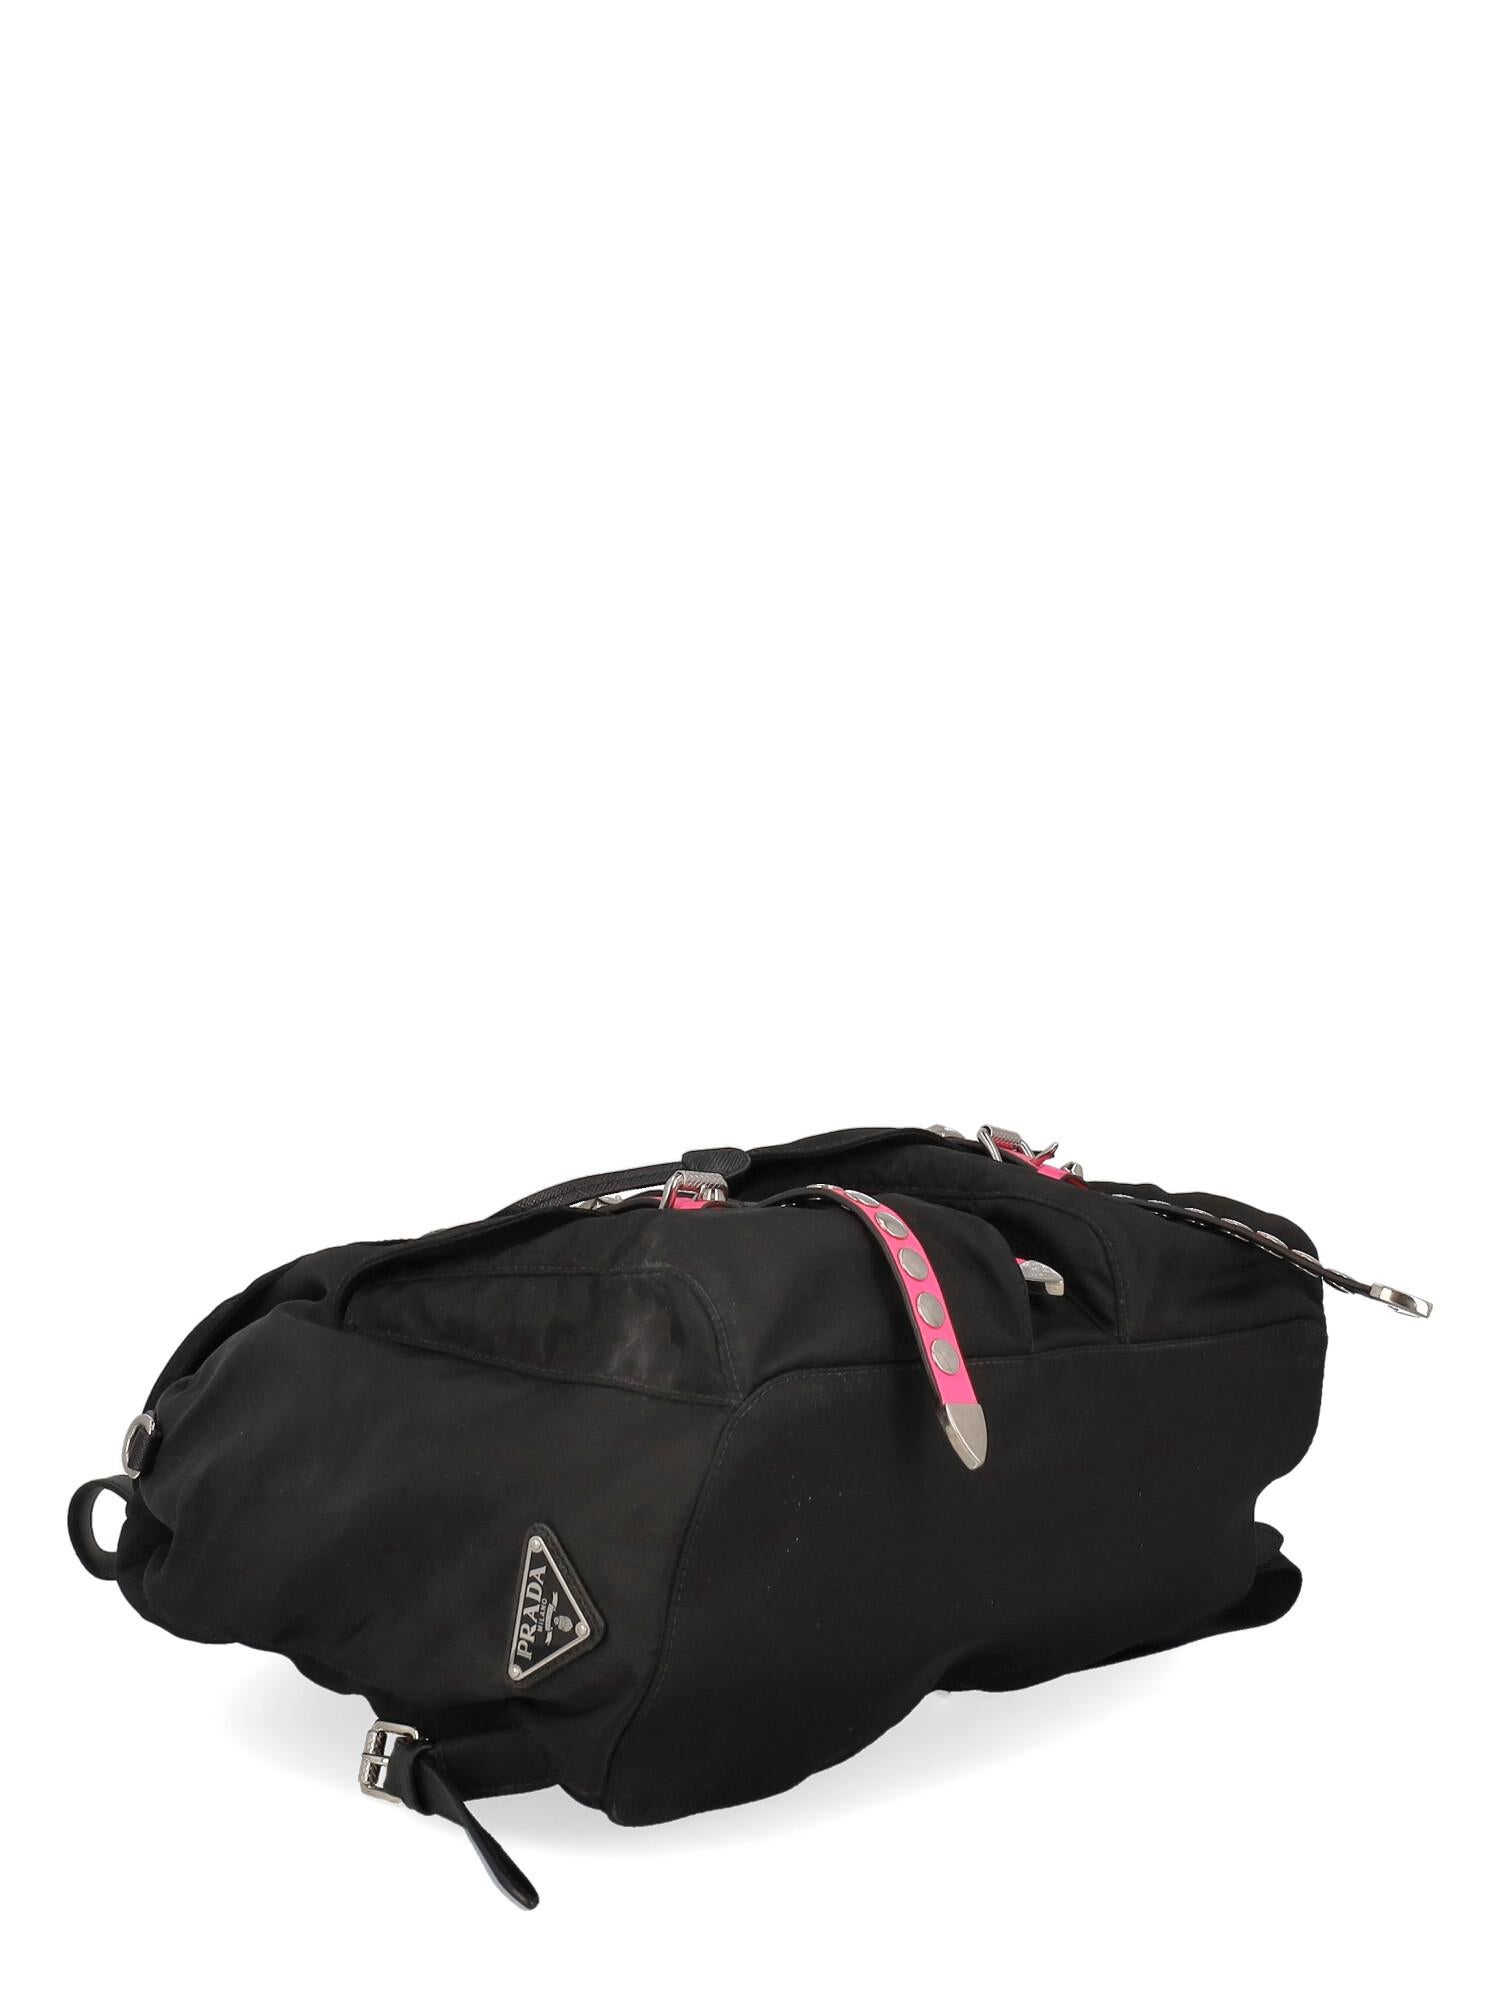 black and pink backpacks